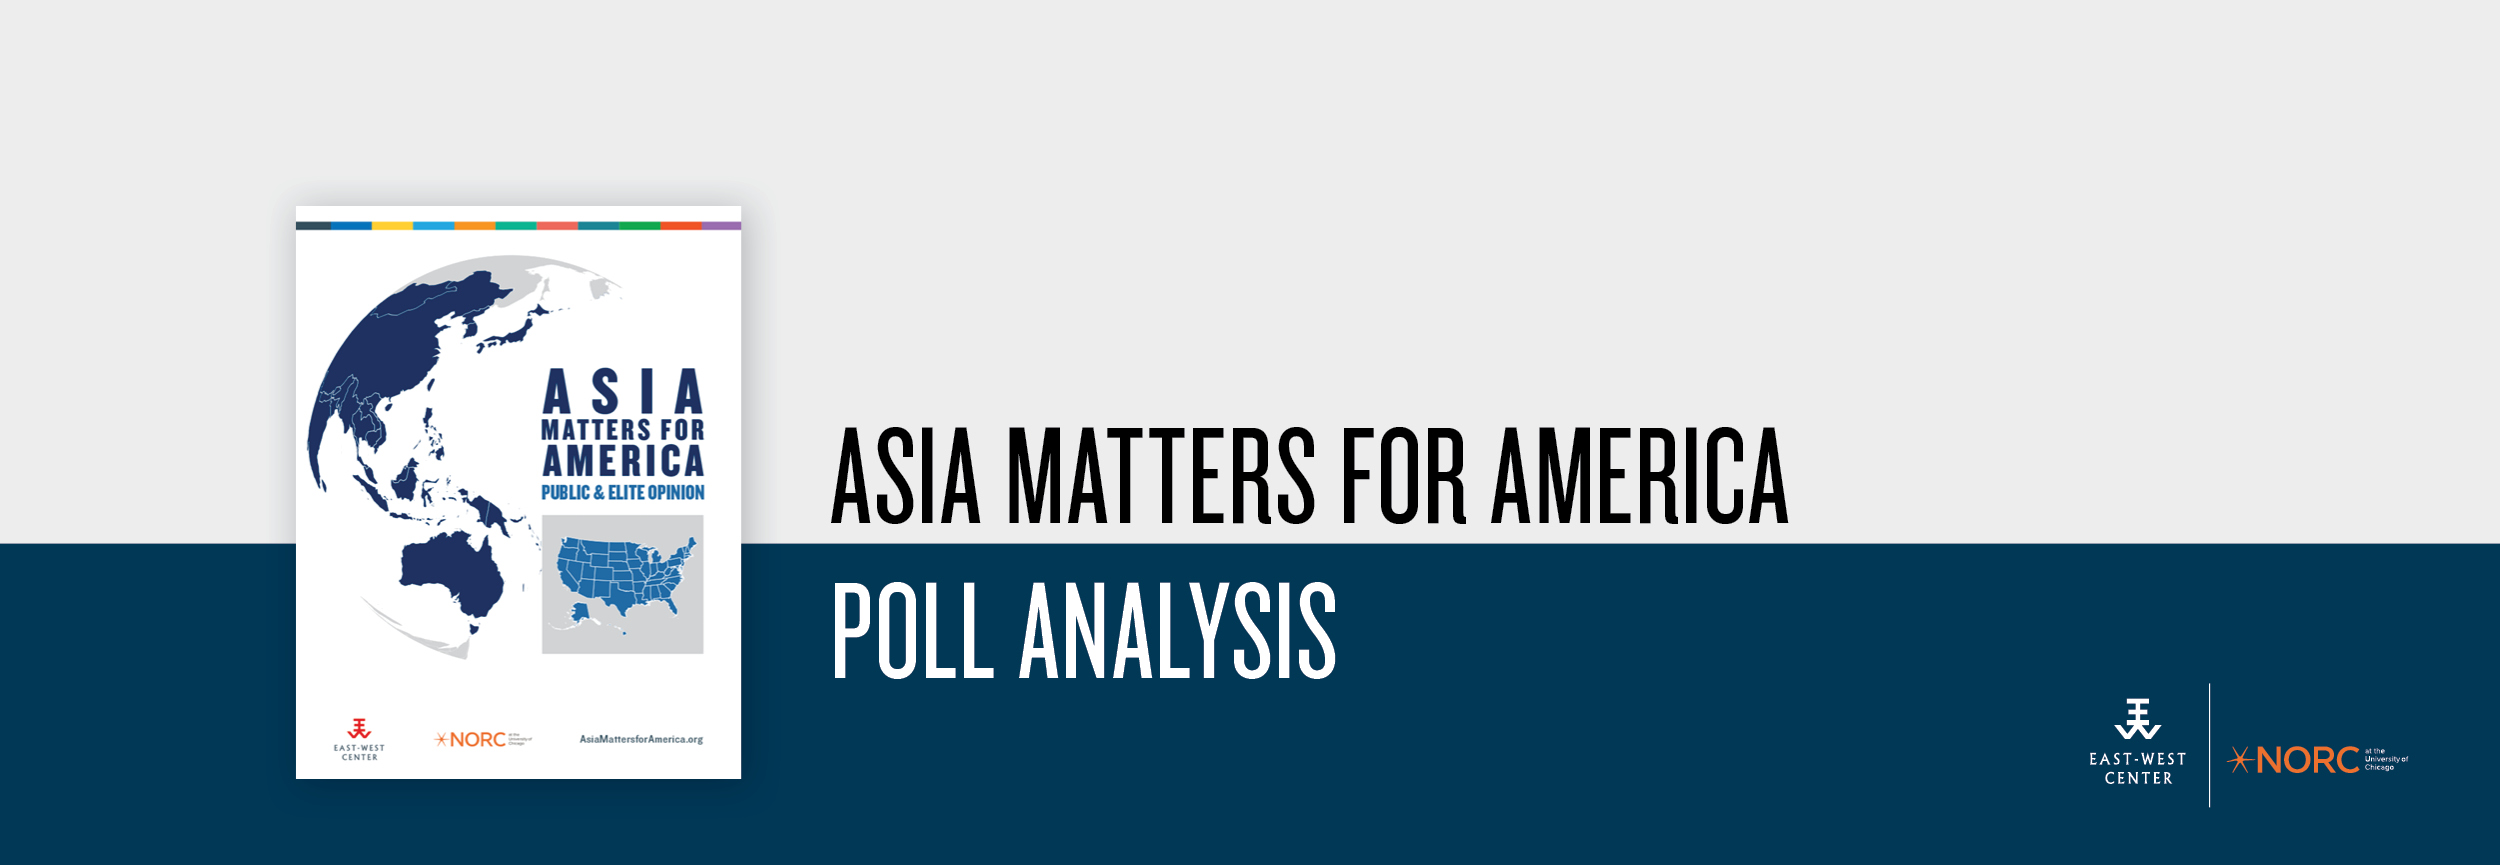 Asia Matters for America Poll Analysis